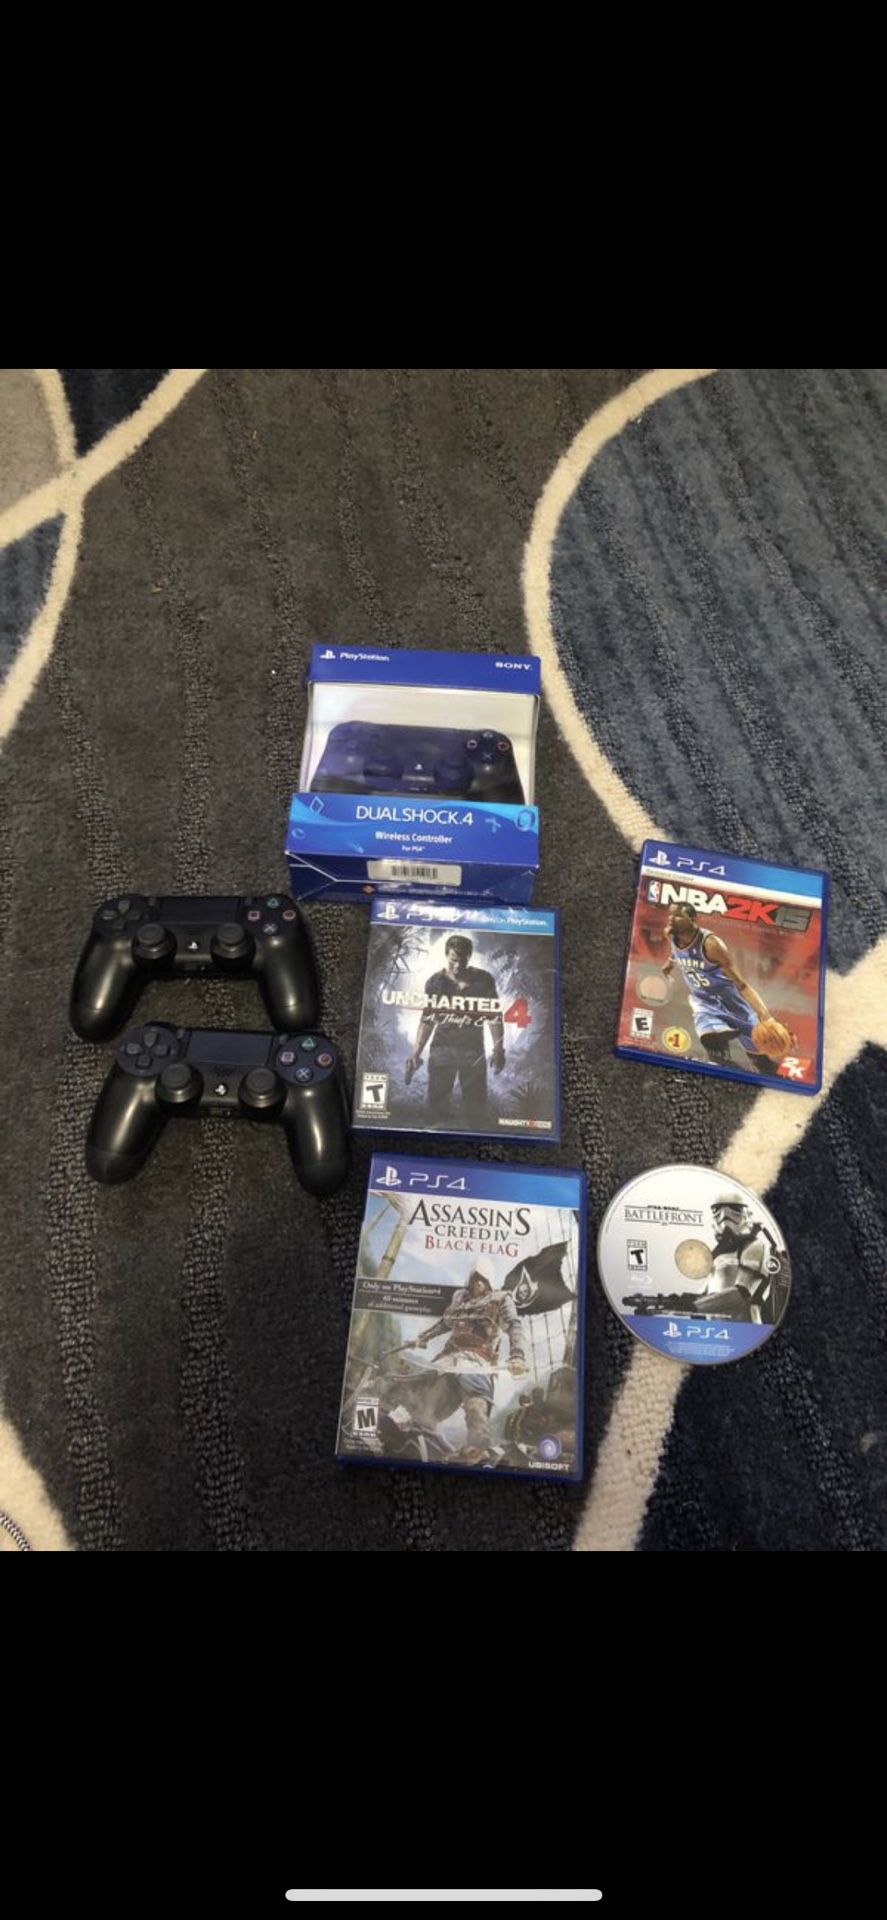 3 PS4 controllers and 4 game bundle